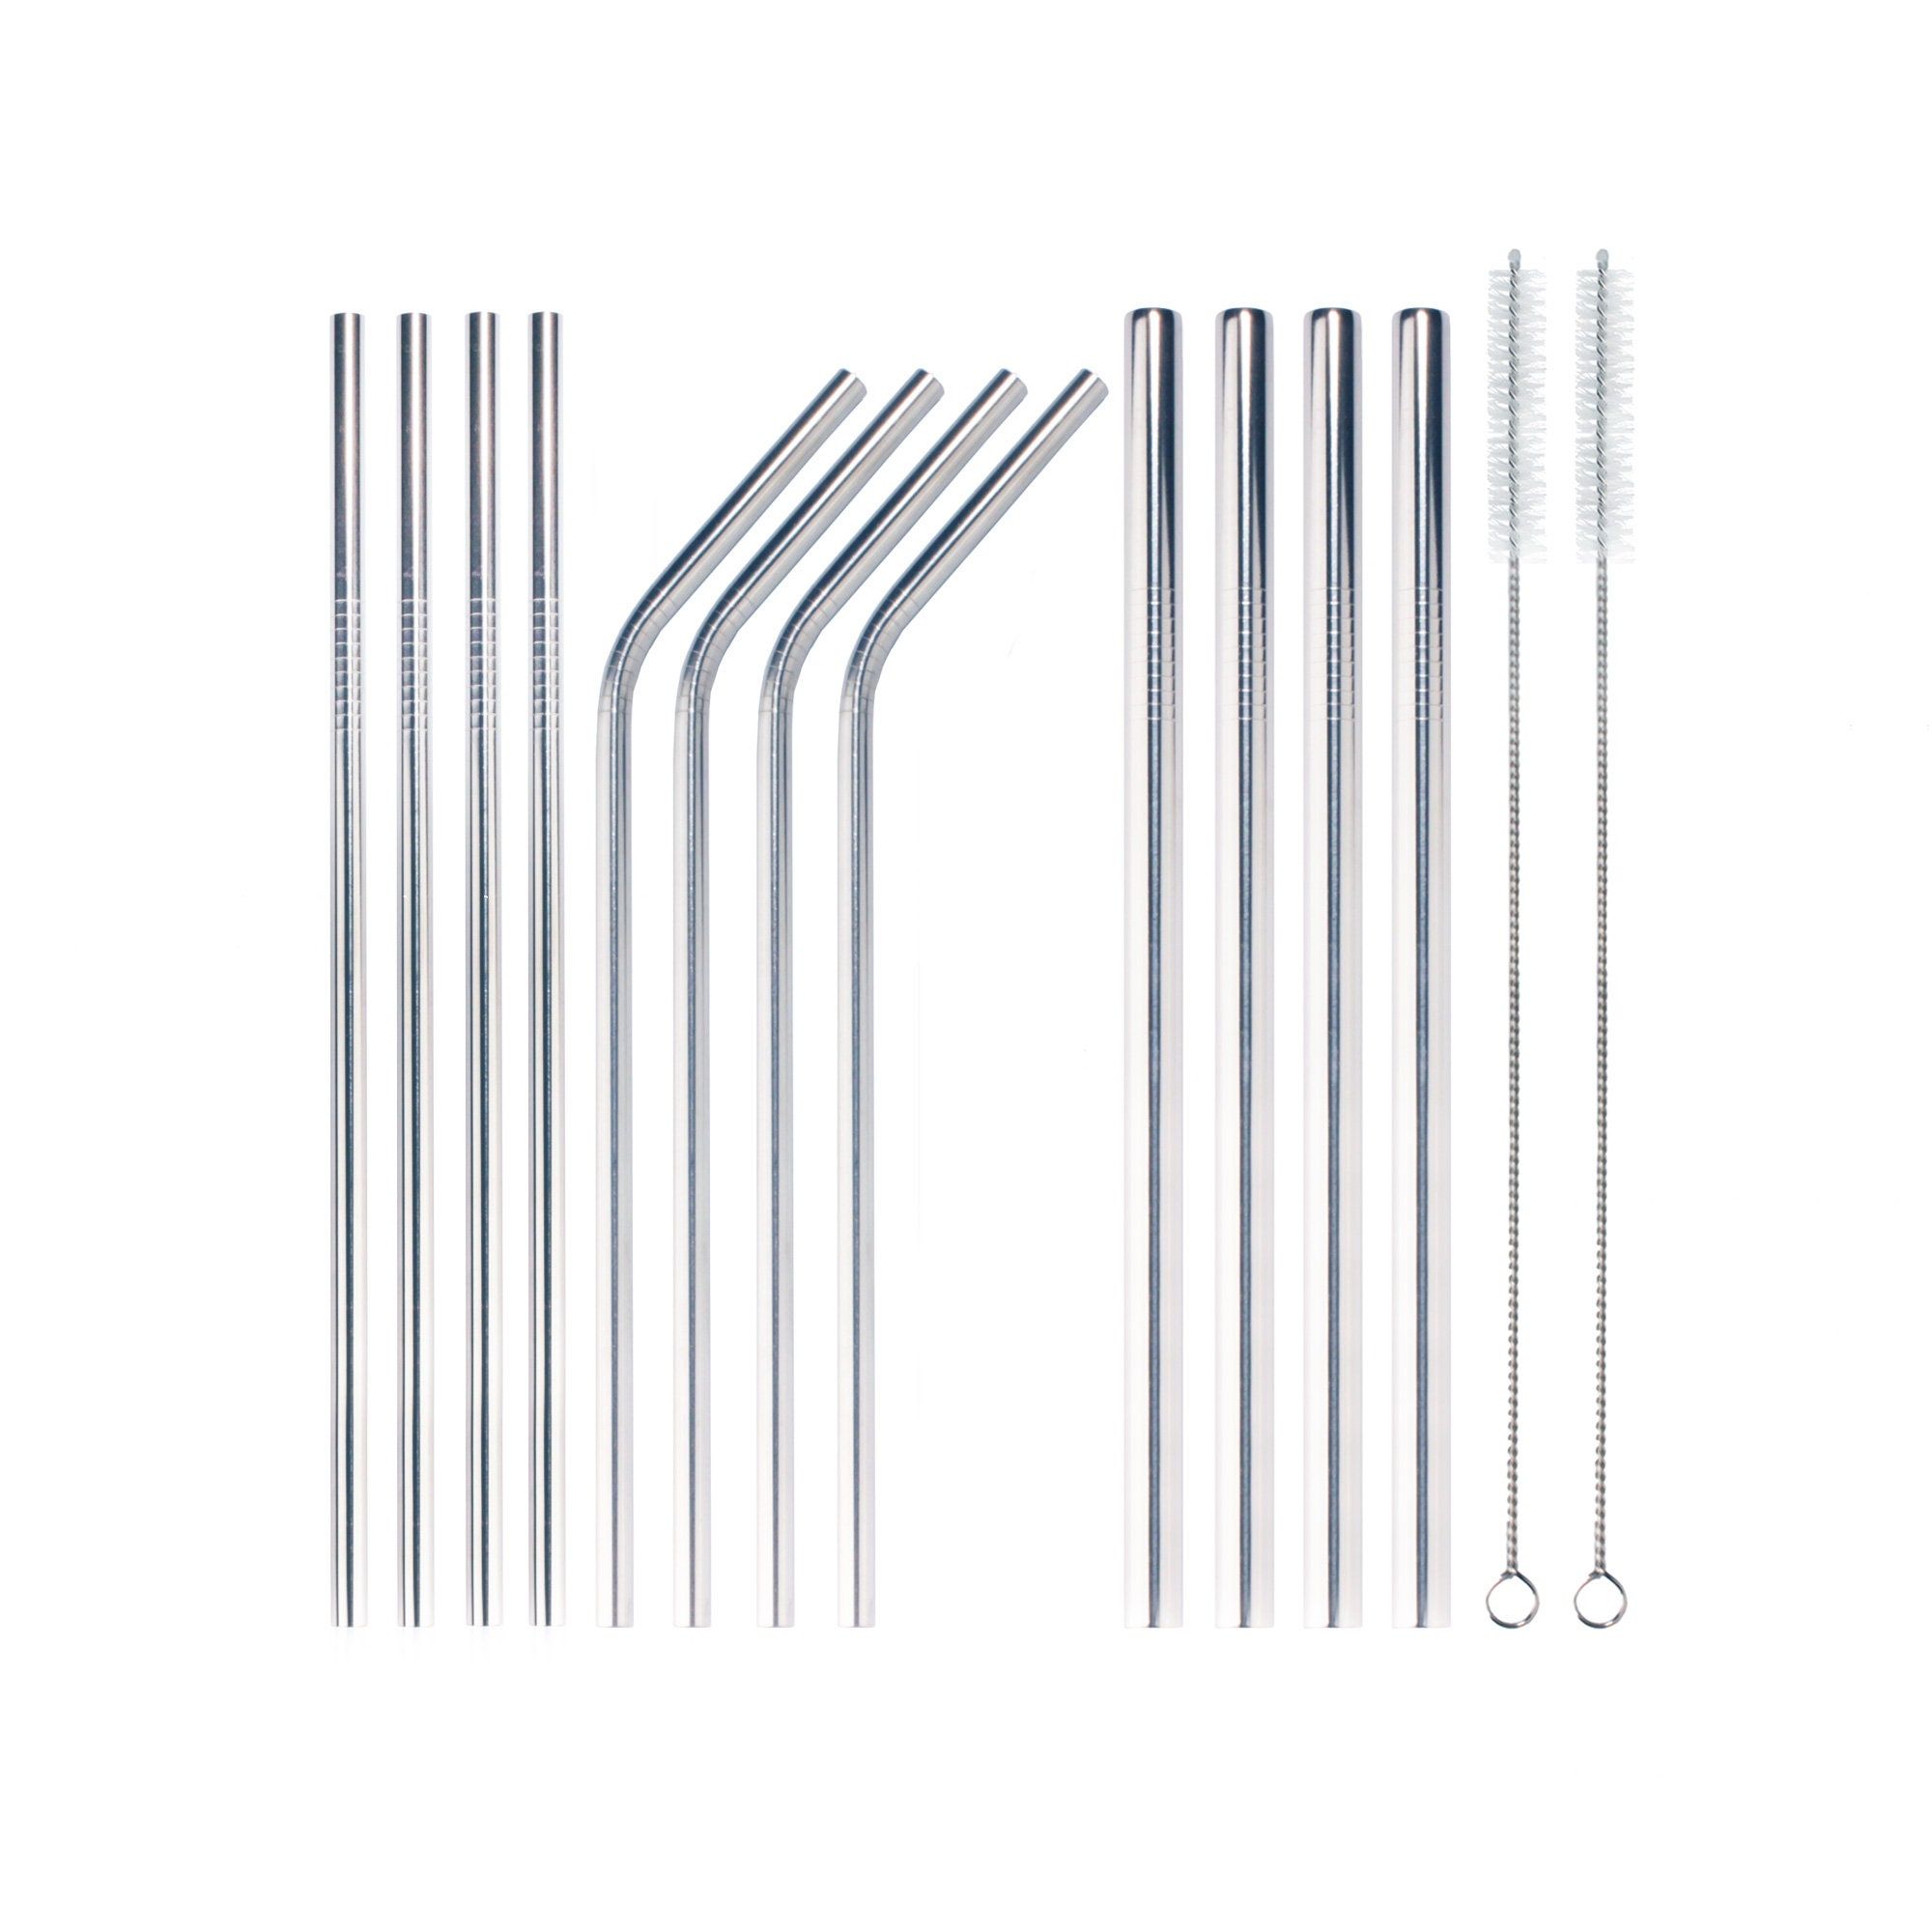 50-Pack Stainless Steel Straws,8.5Inch Reusable Drinking Metal